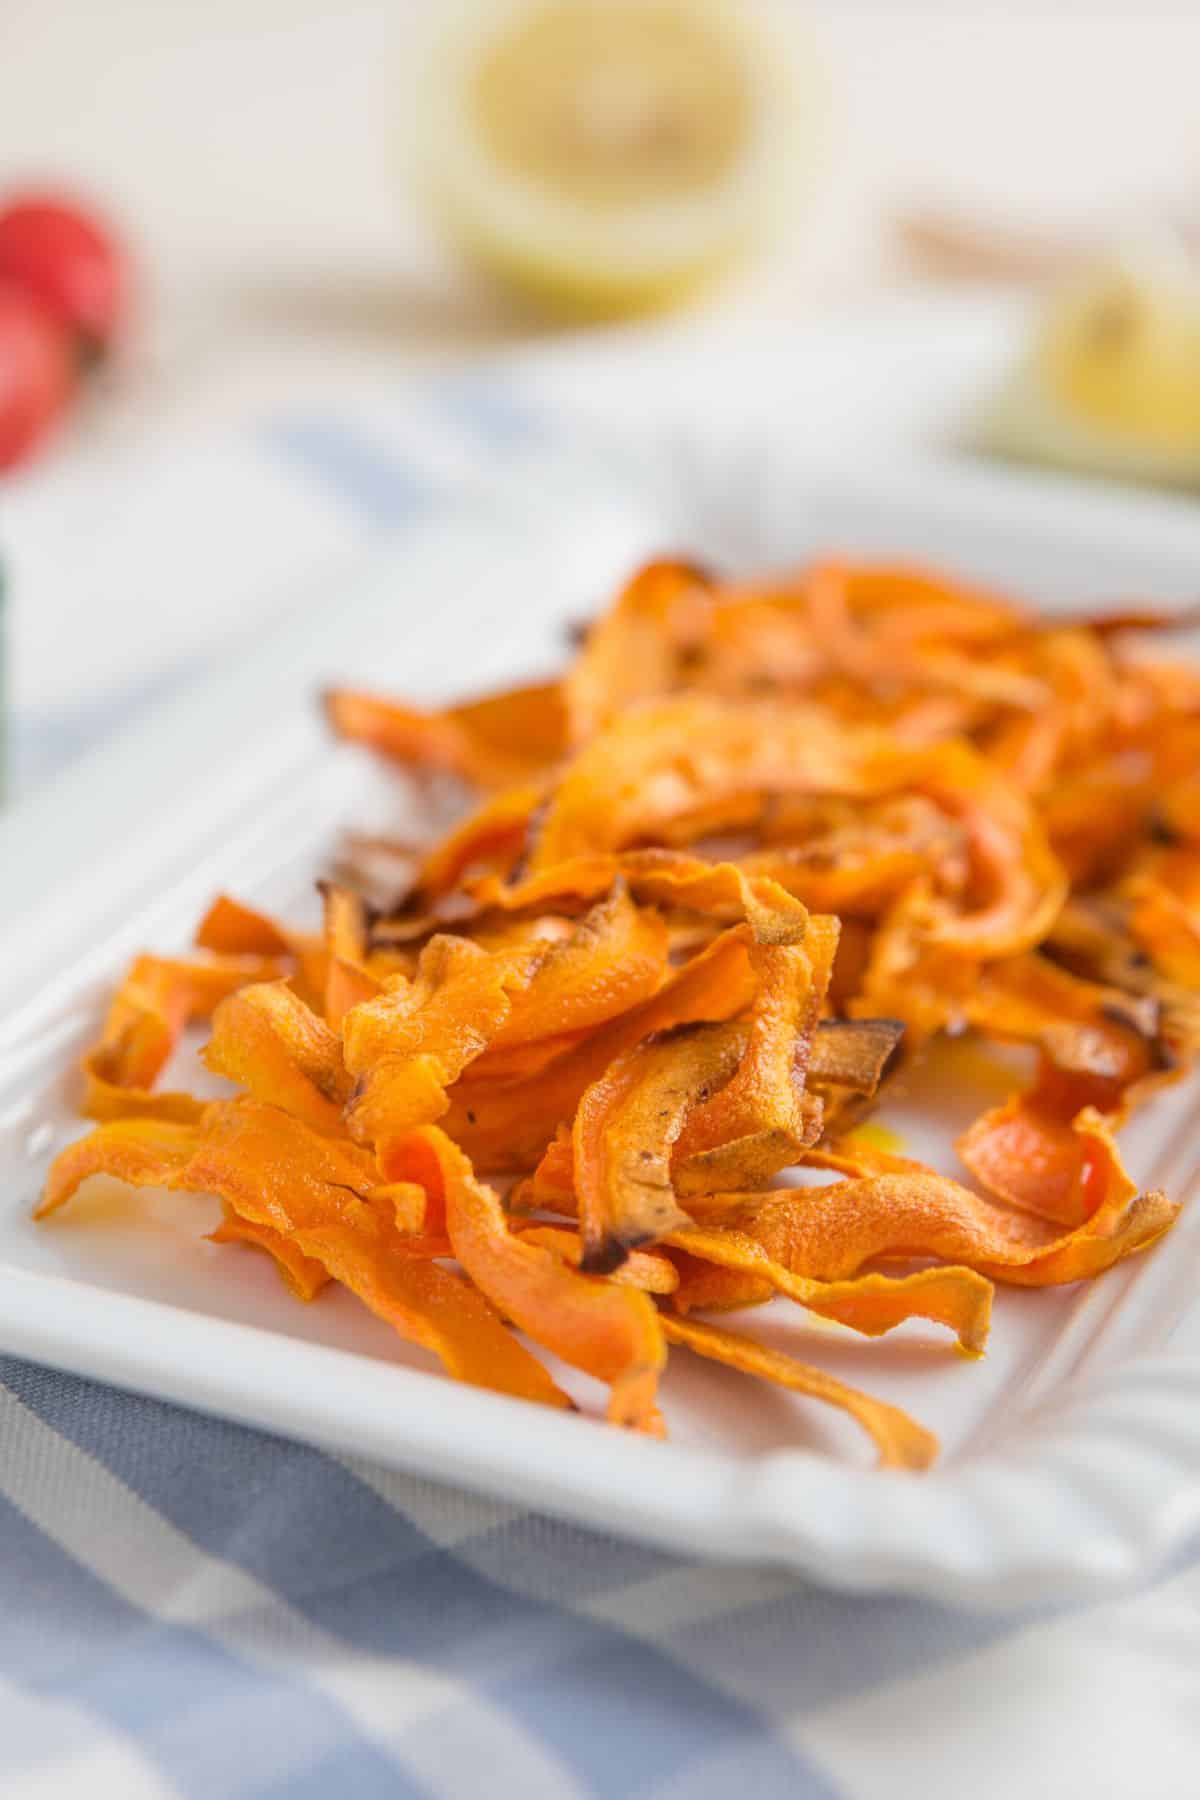 dehydrated carrot strips on plate.